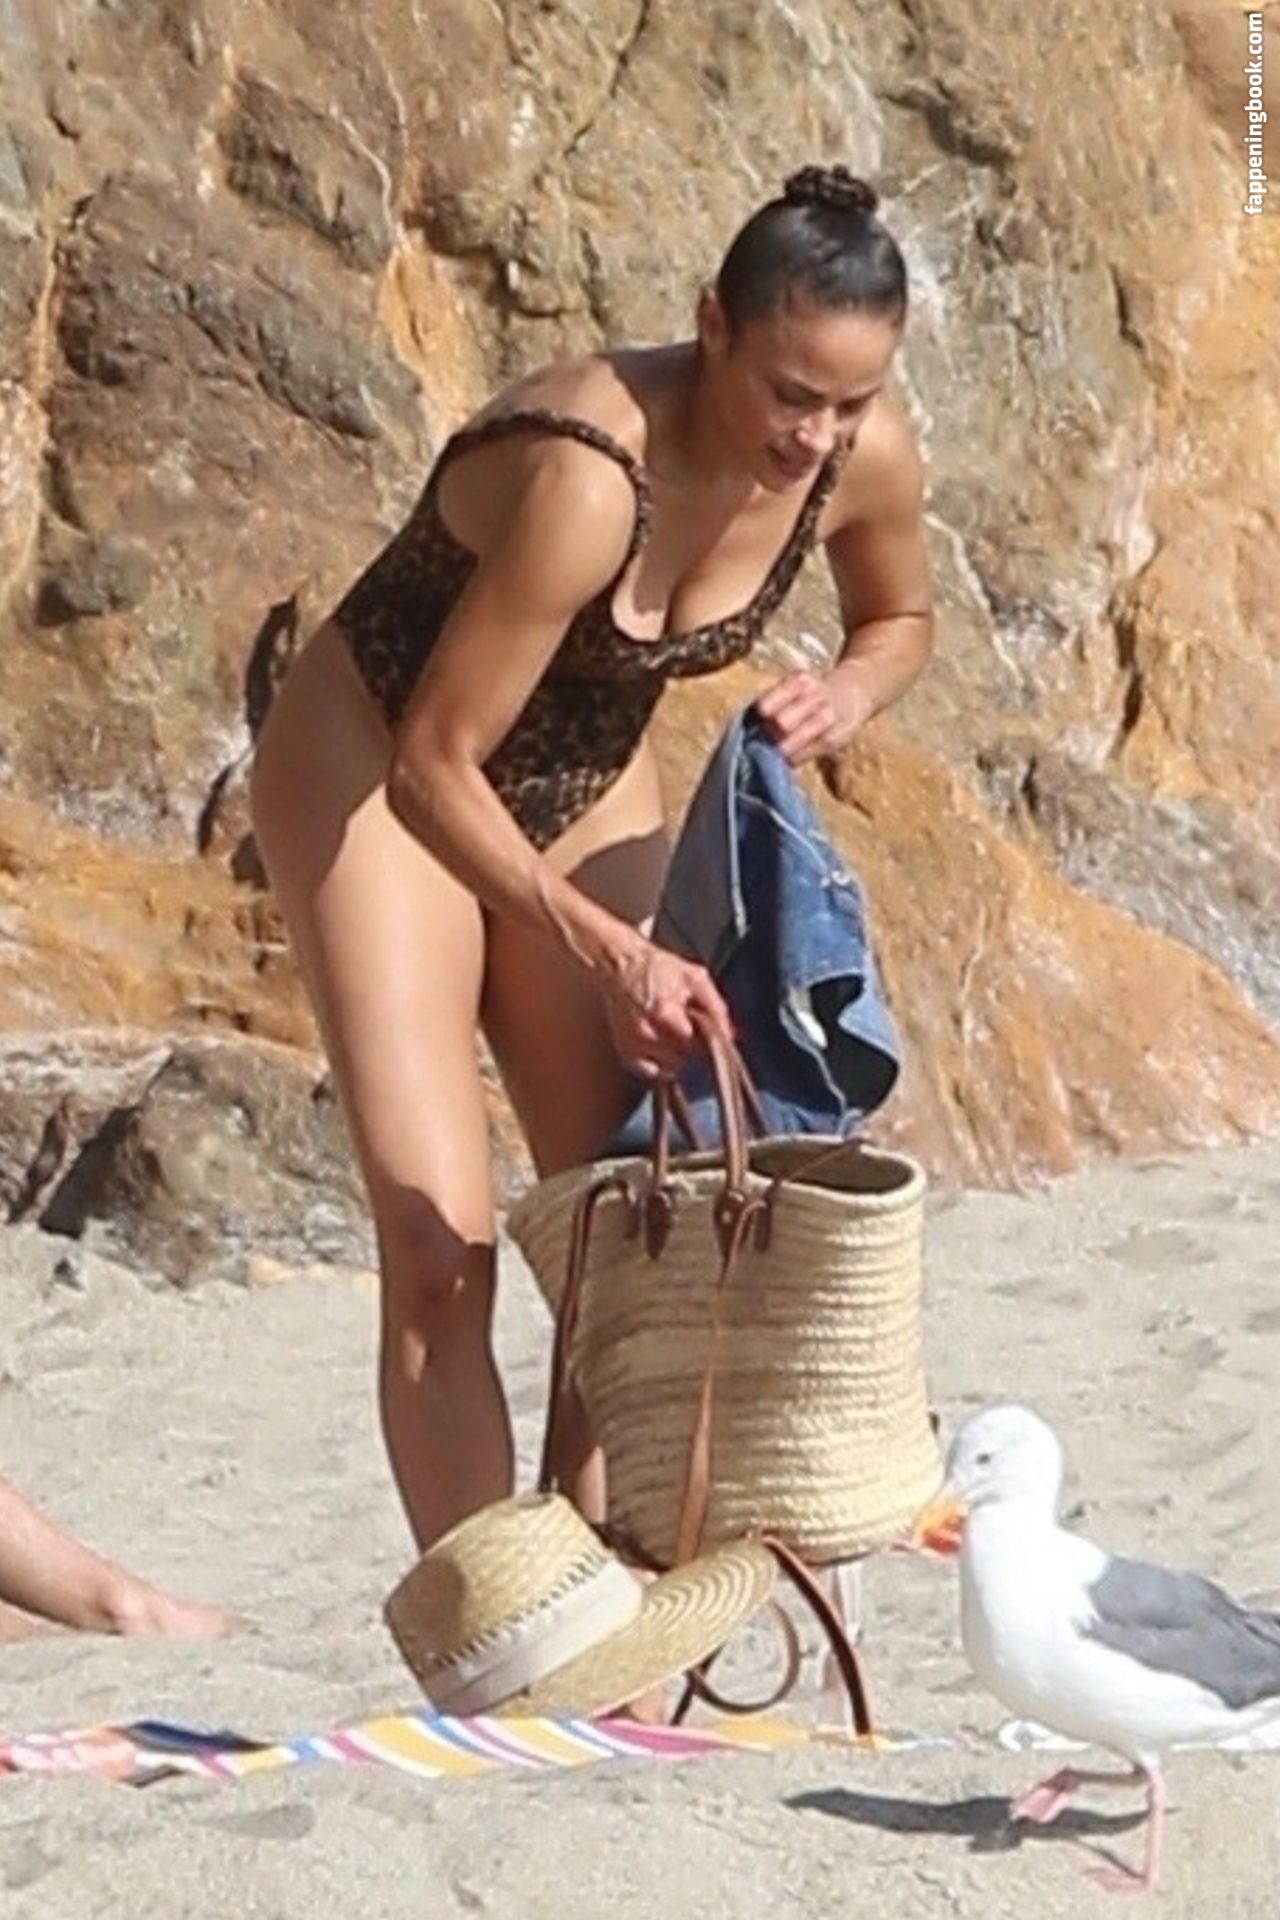 Nude pictures of paula patton